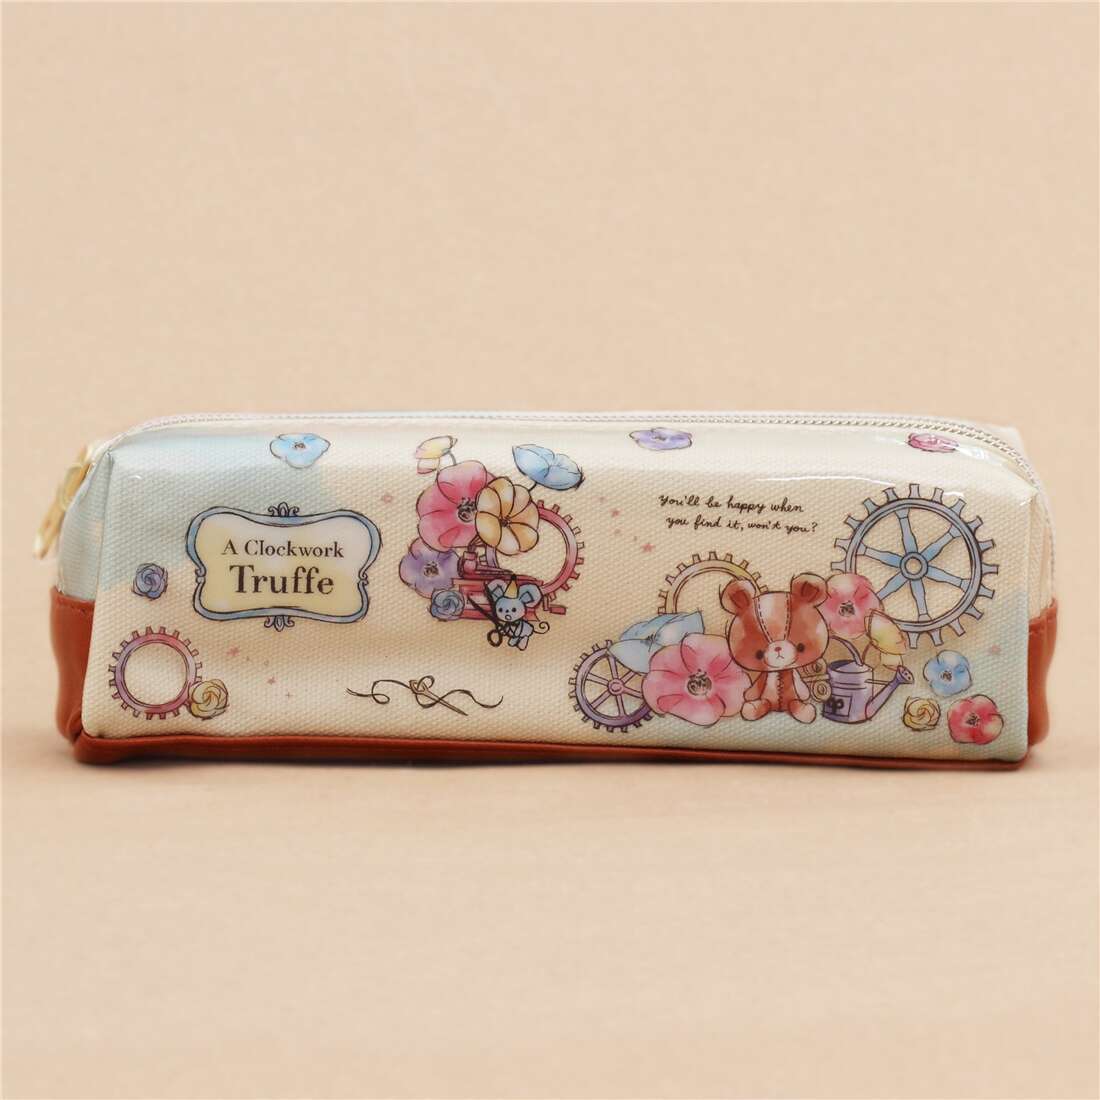 cream colorful toy cat bear animal flower pencil case by Kamio from Japan -  modeS4u